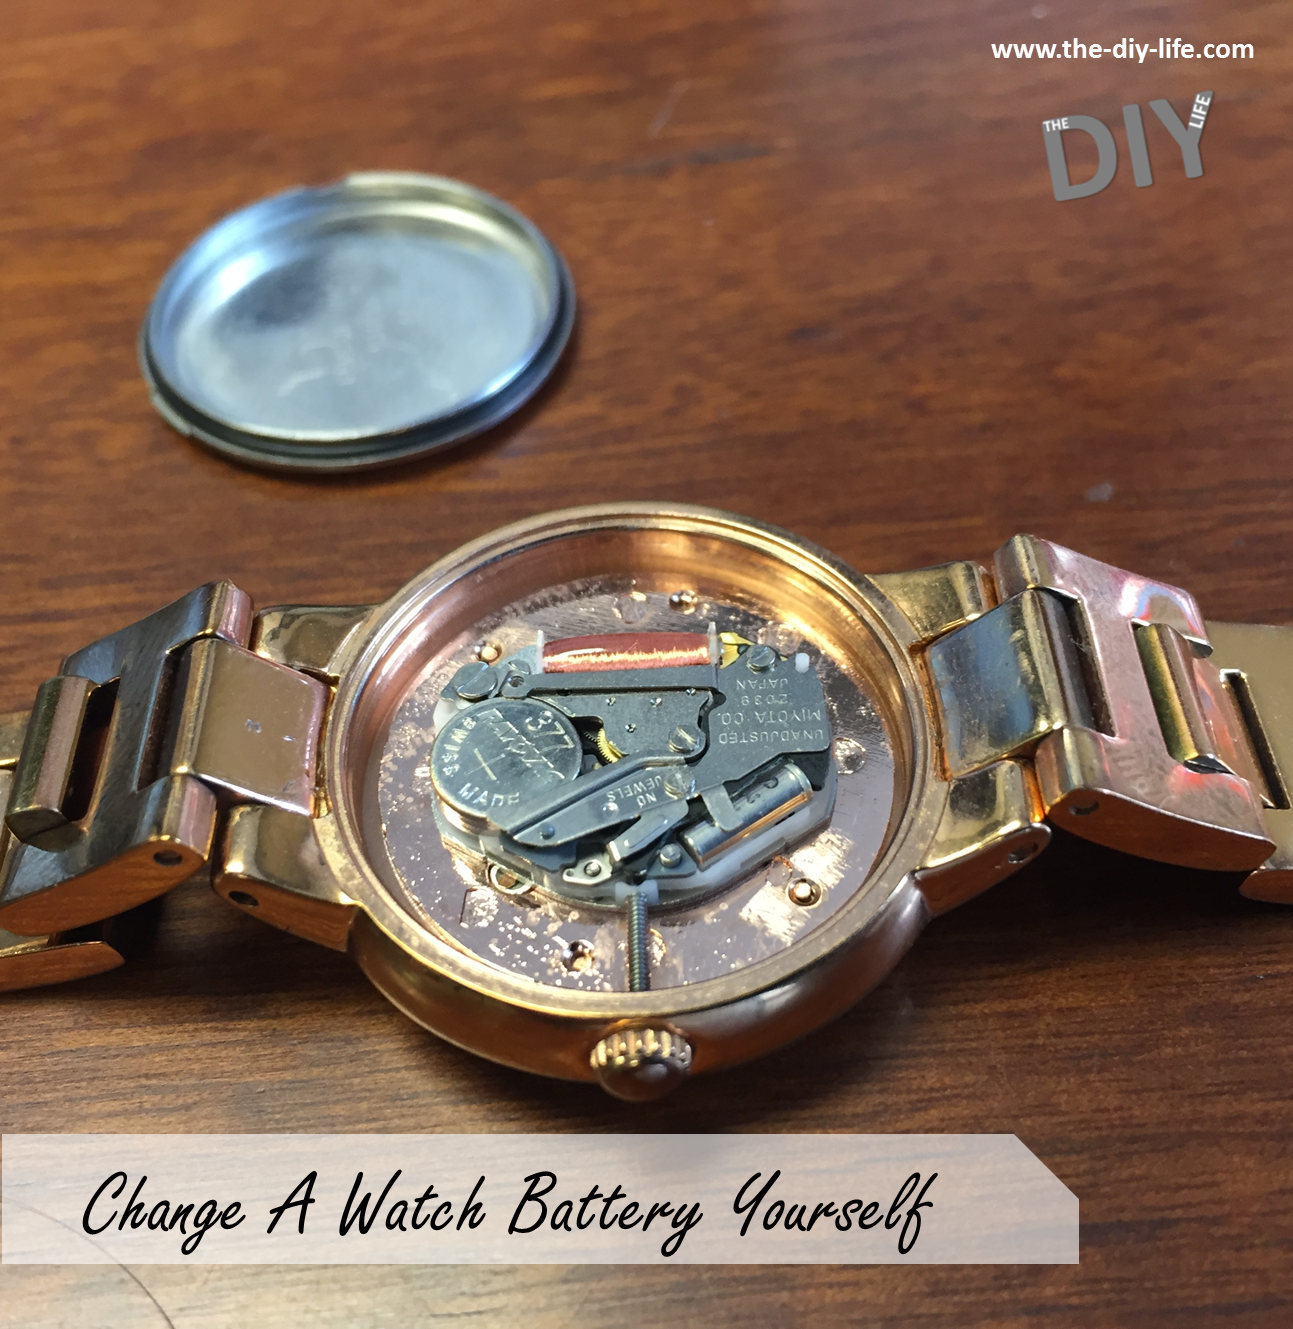 Timex m cell watch battery replacement instructions ascsehalf